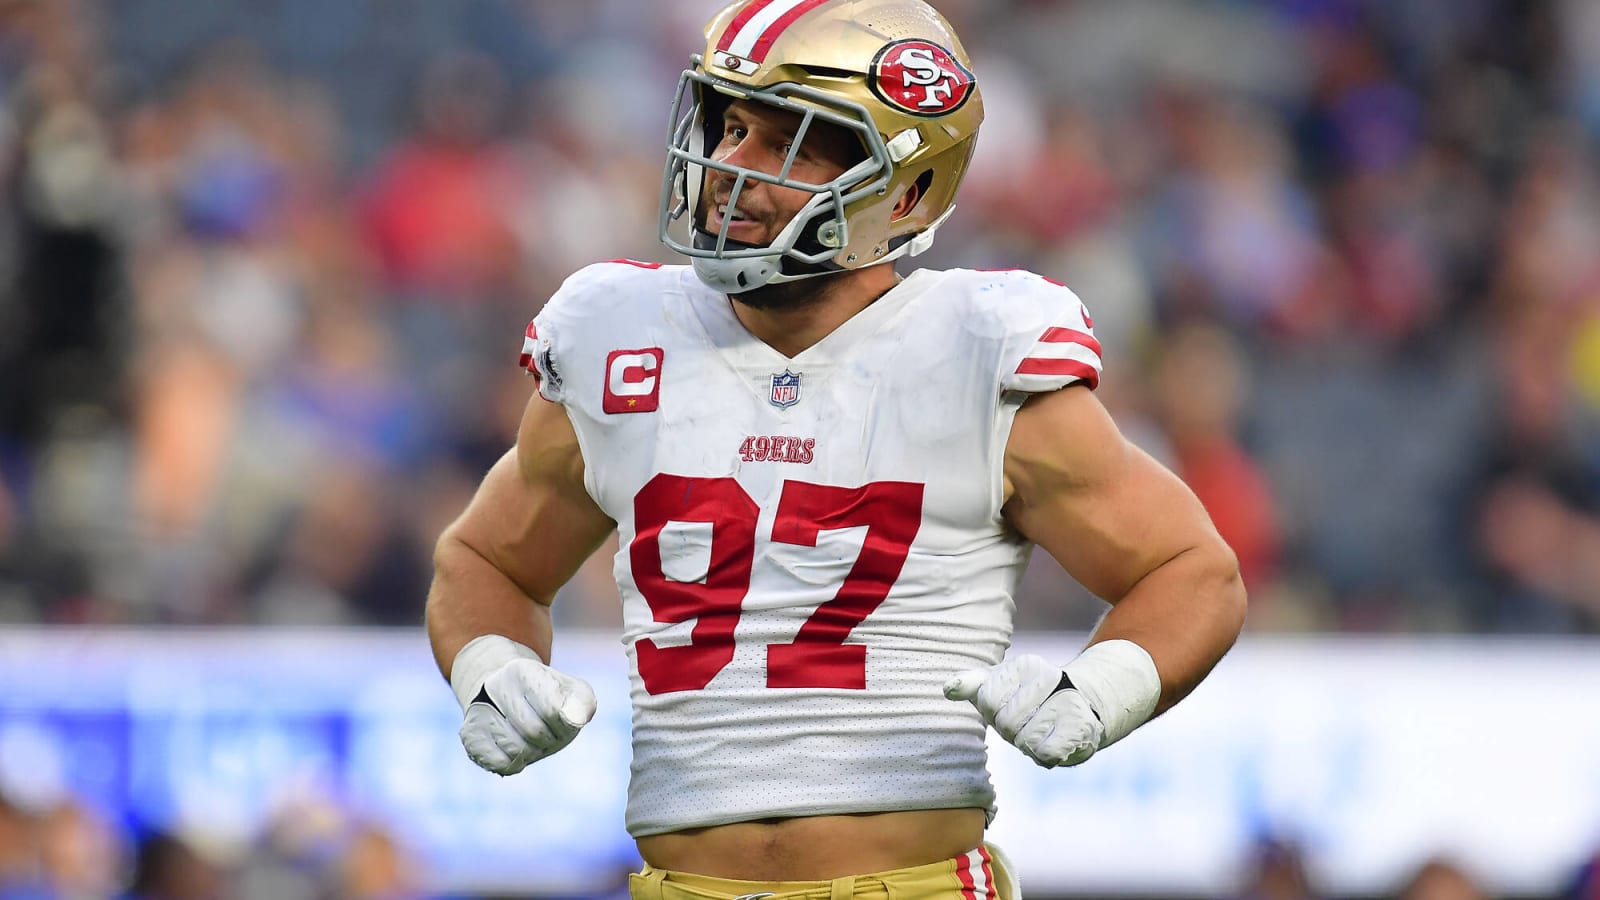 Nickel Coverage: How the 49ers Defense Has Emerged as the Best